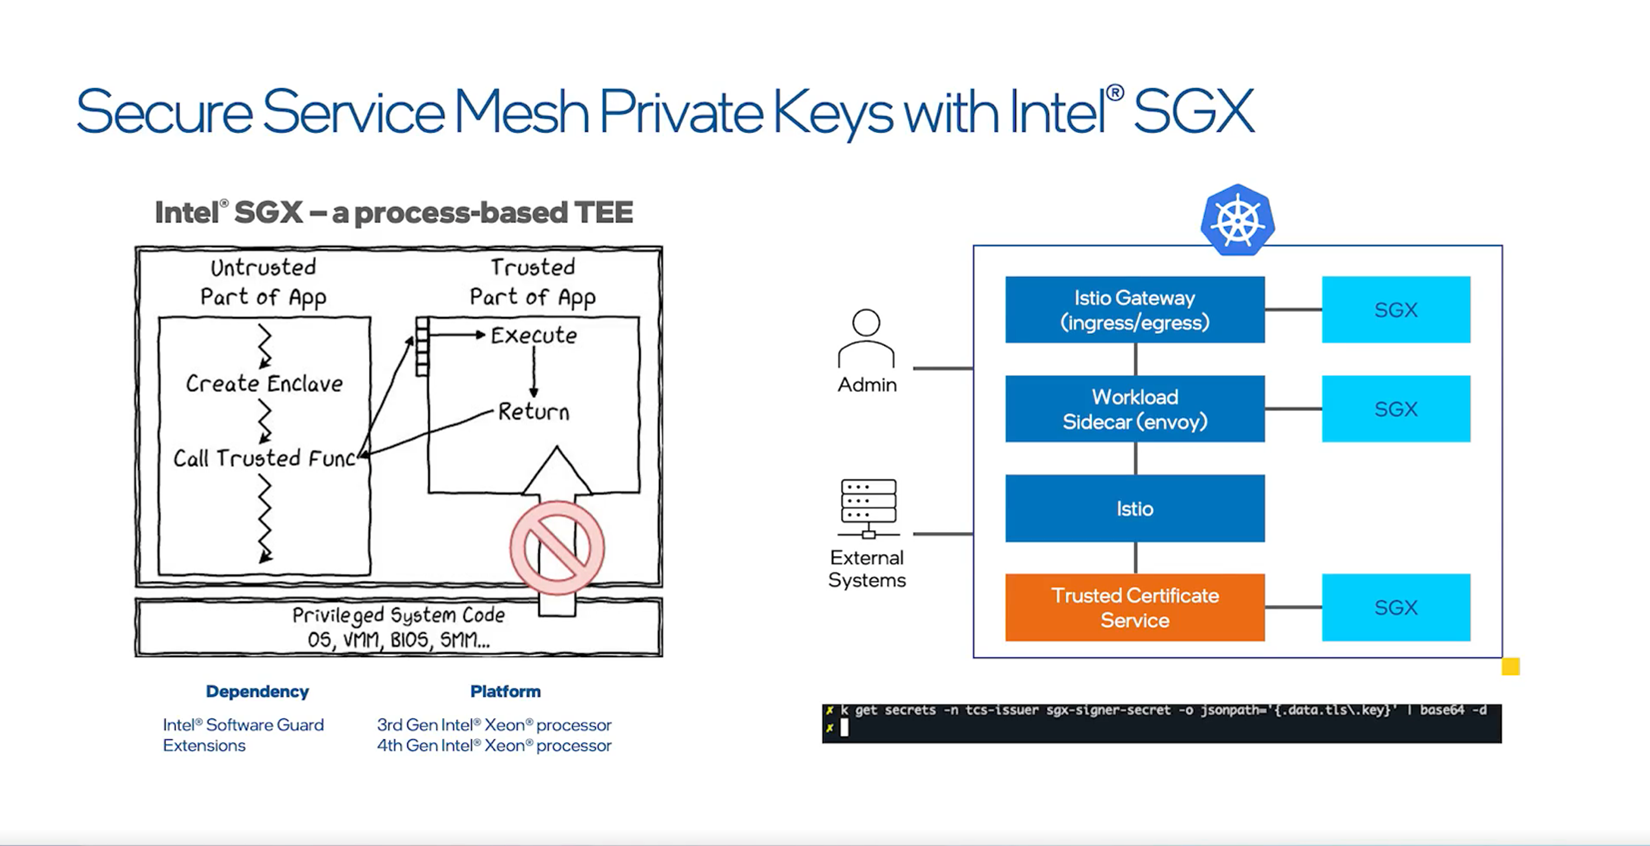 A graphic illustrates Intel® SGX providing secure enclaves and which operations run in them.